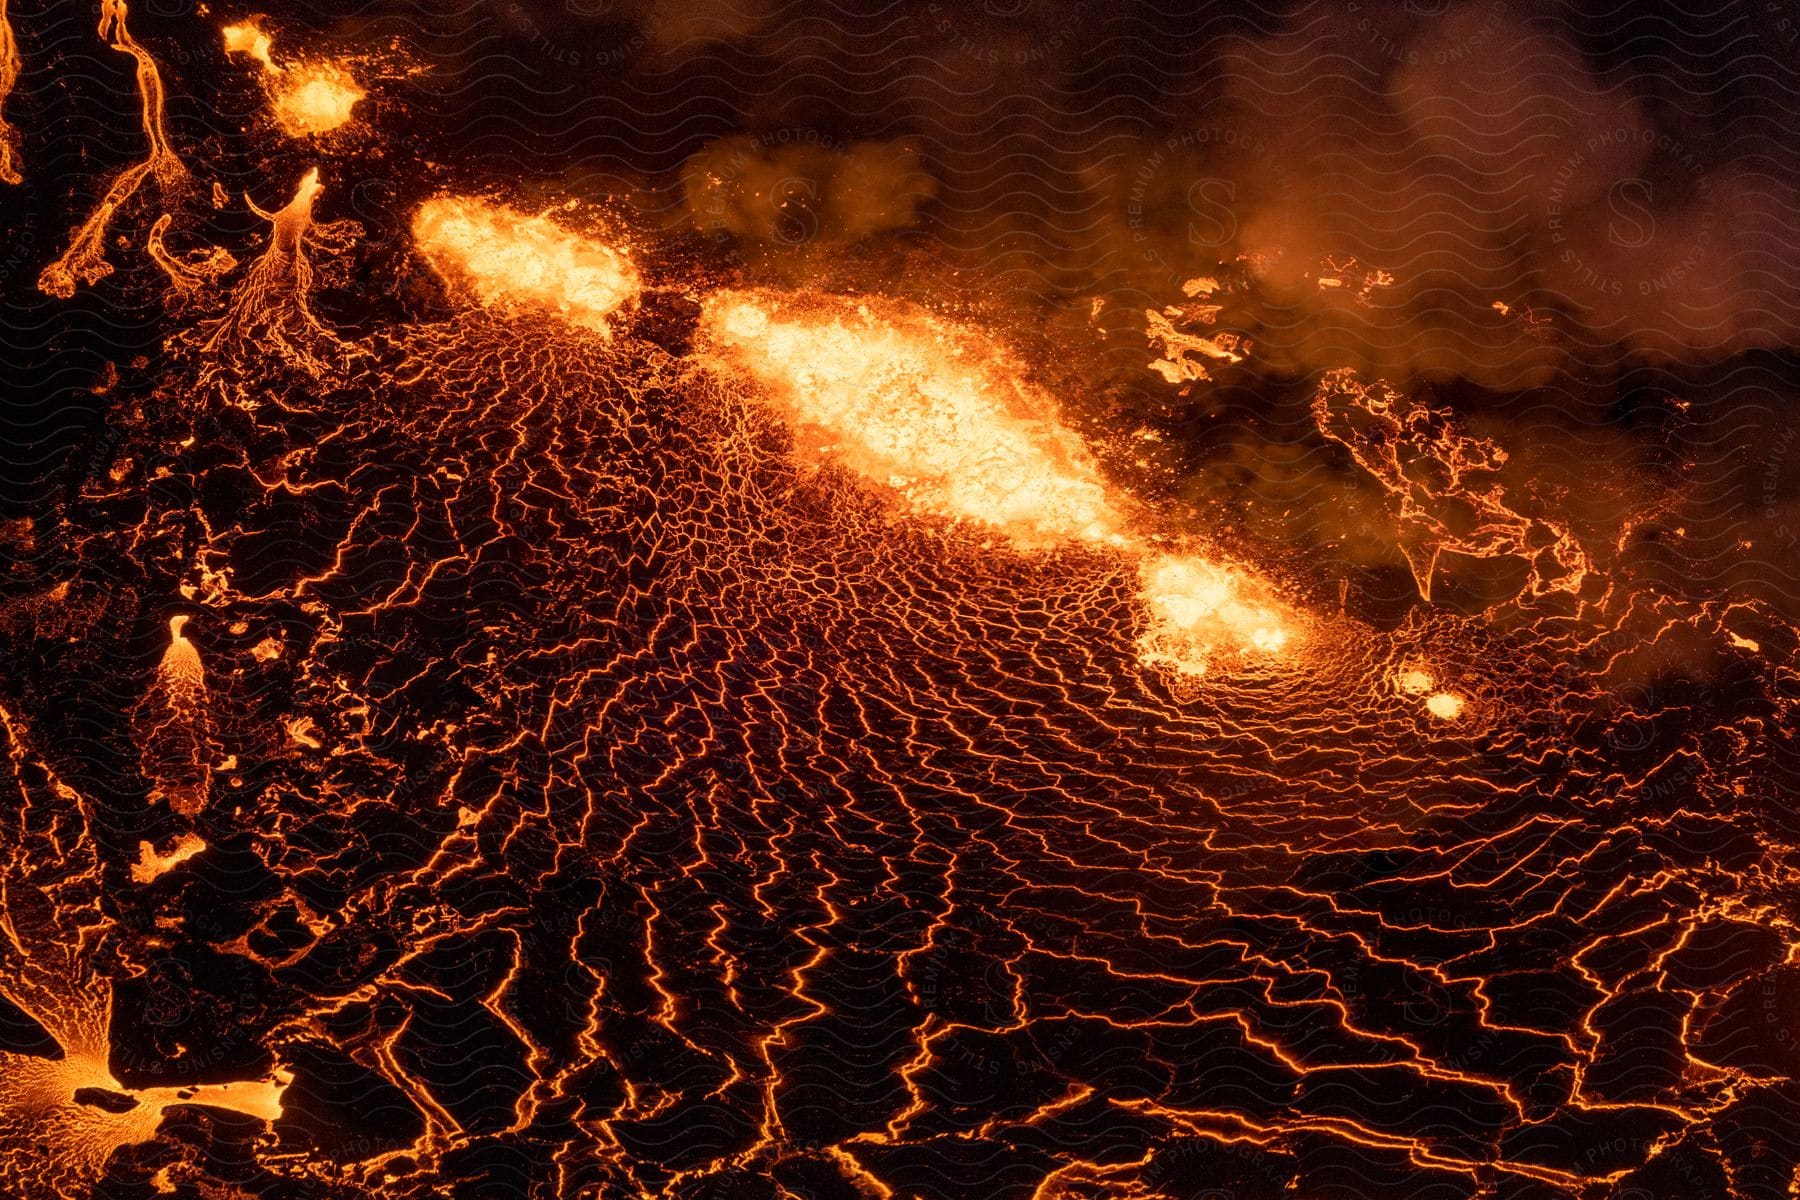 Lava erupting from a volcano and covering the ground at night